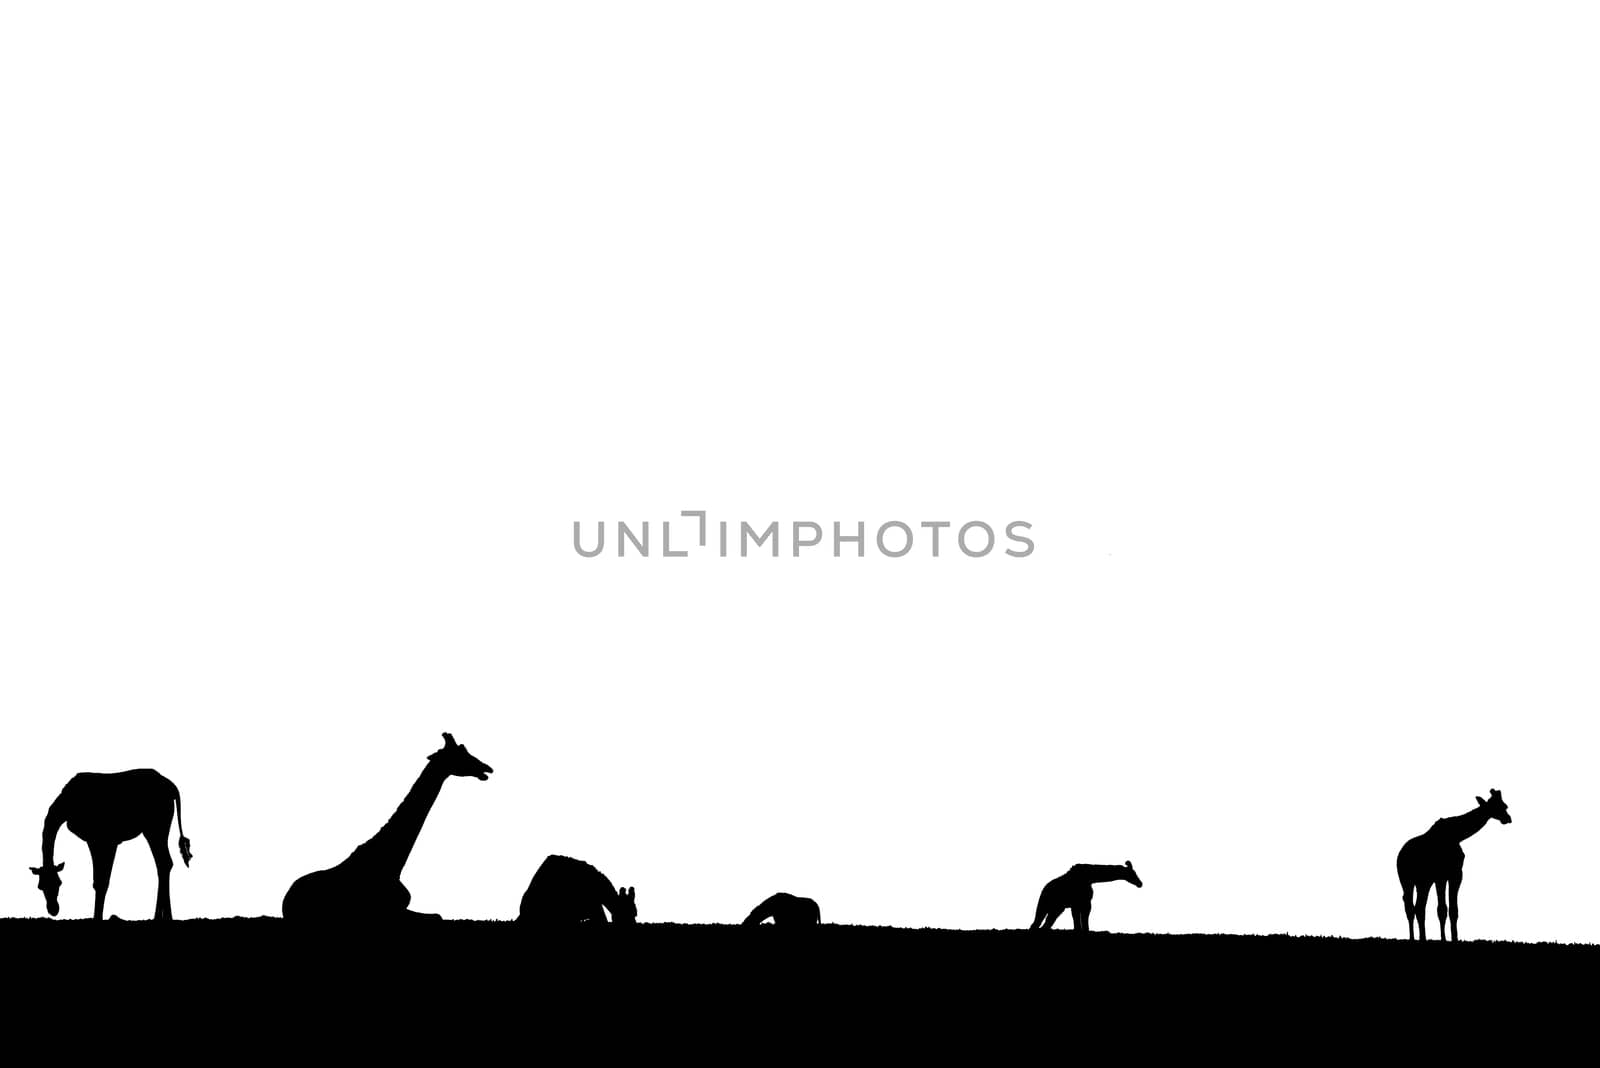 giraffes on the horizon in silhouette by morrbyte